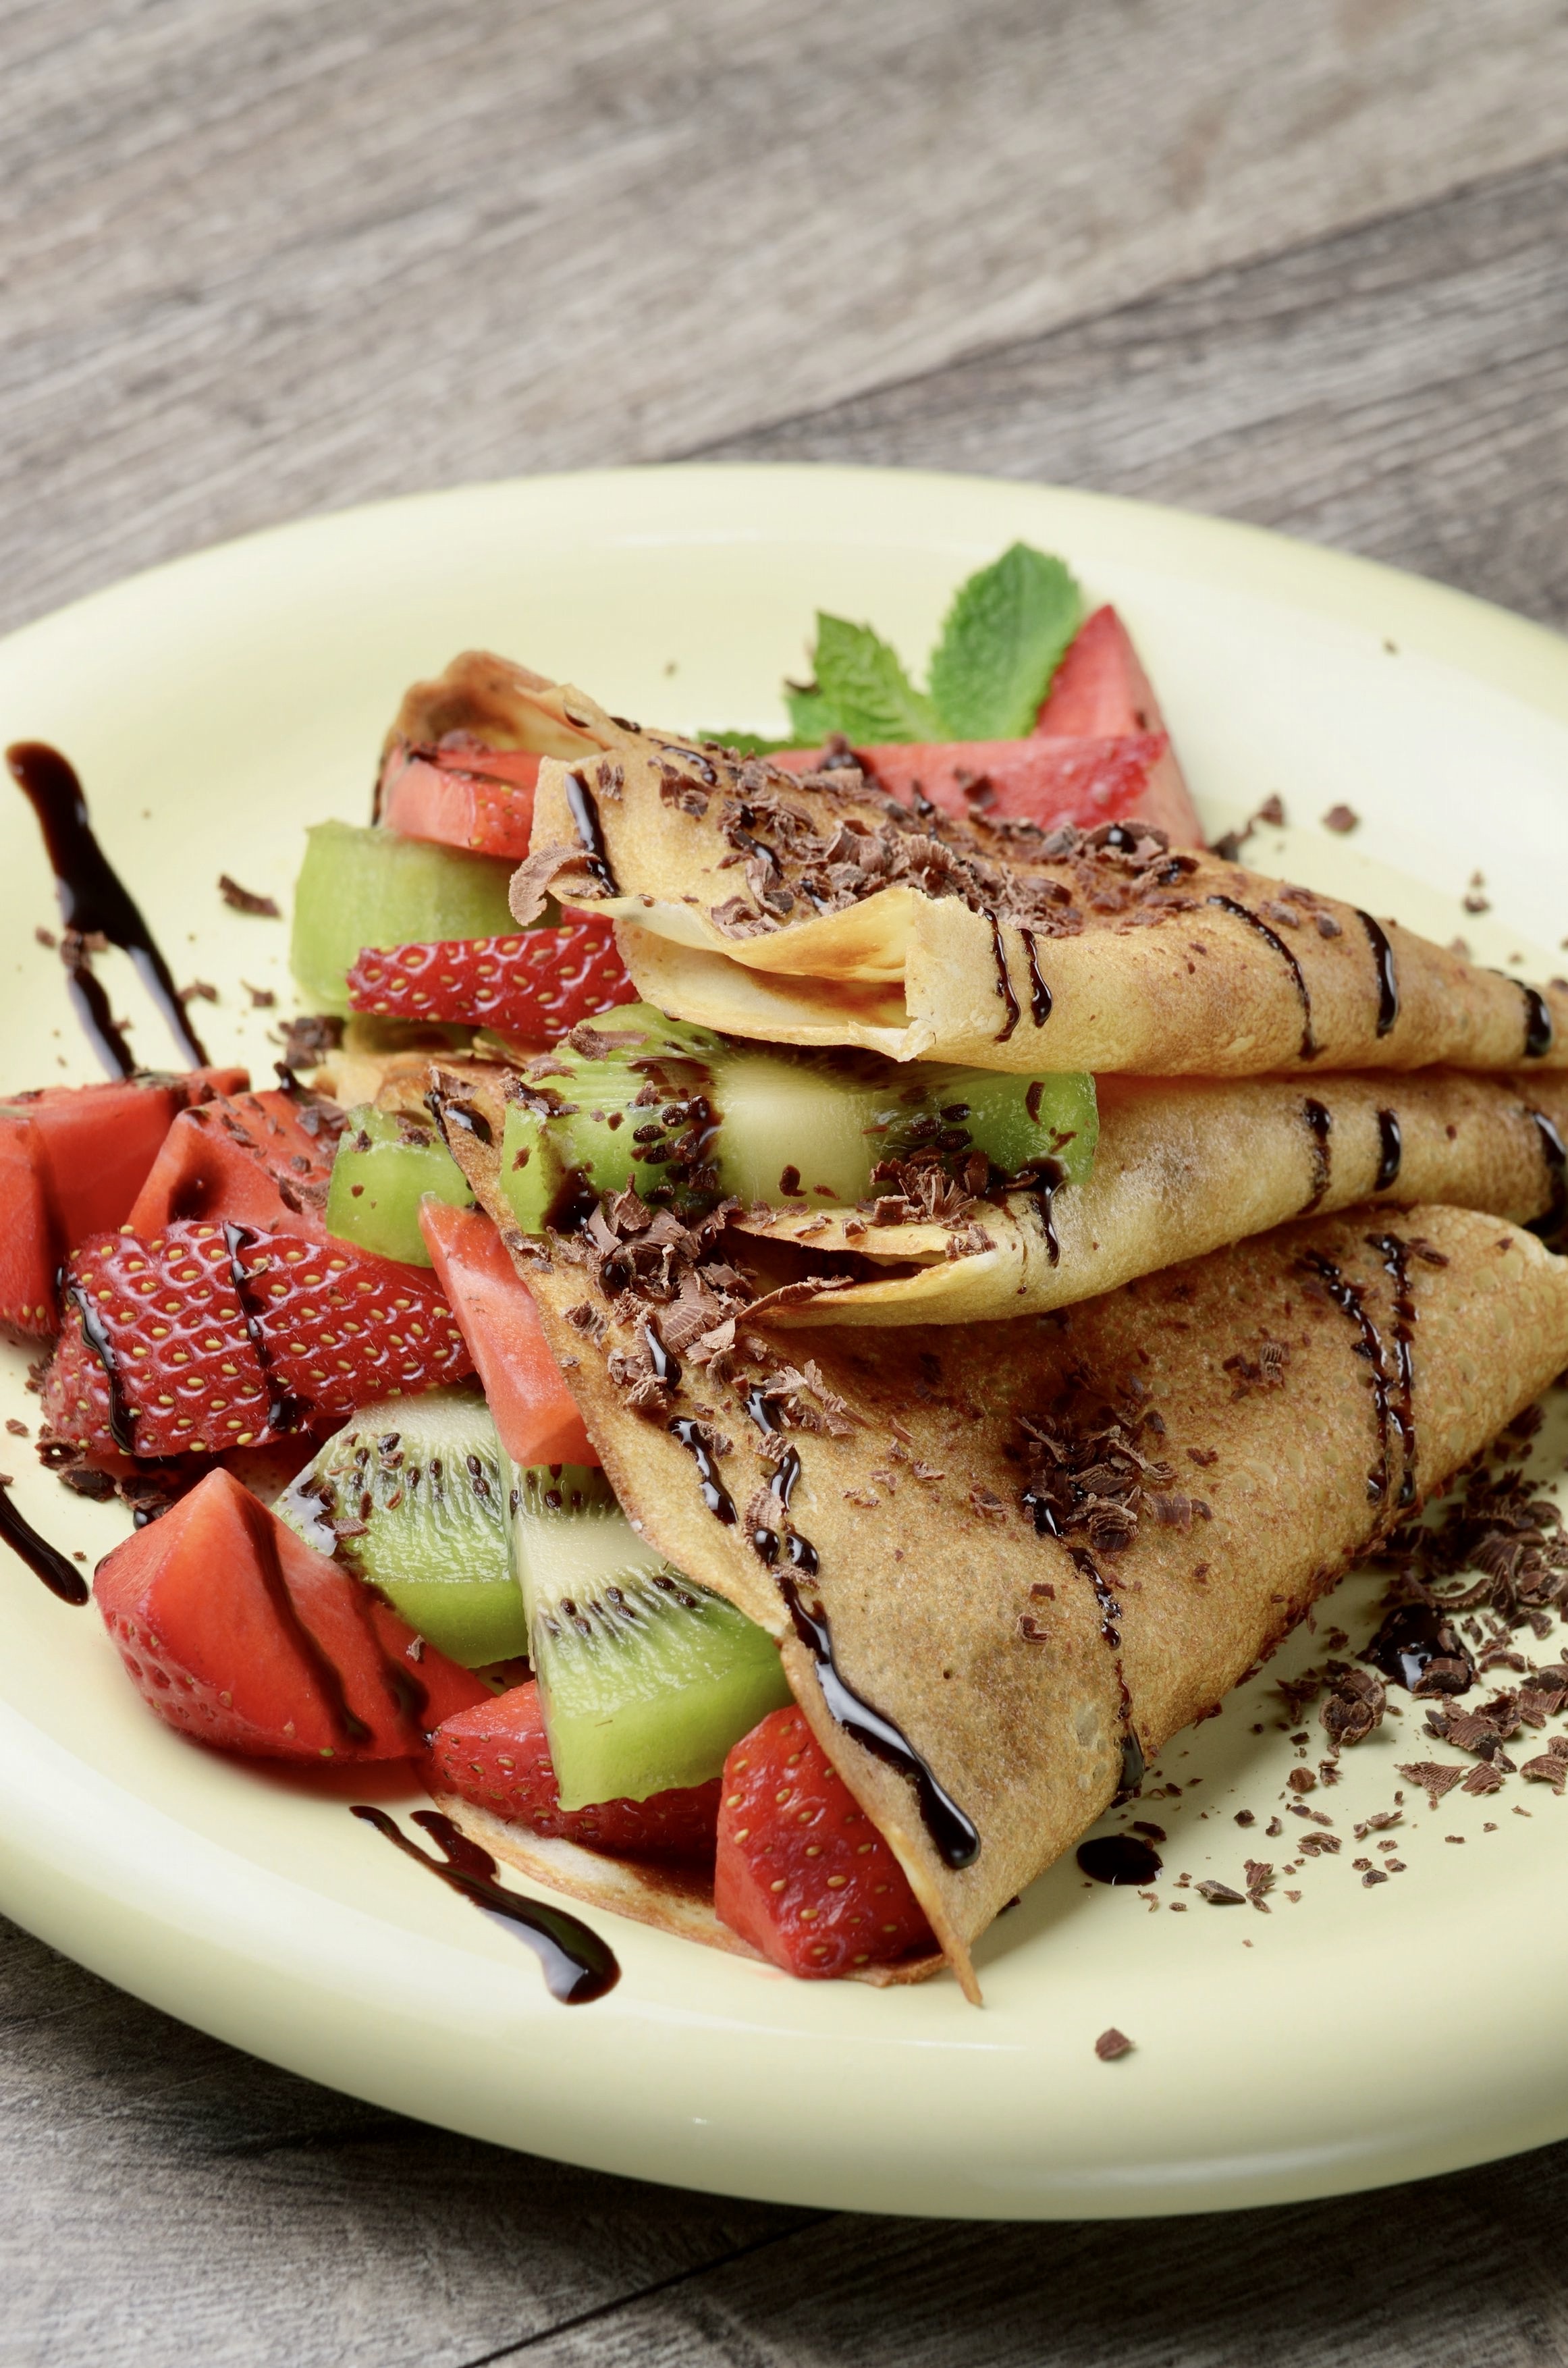 An undated photo shows a French crêpe with fruit. /IC